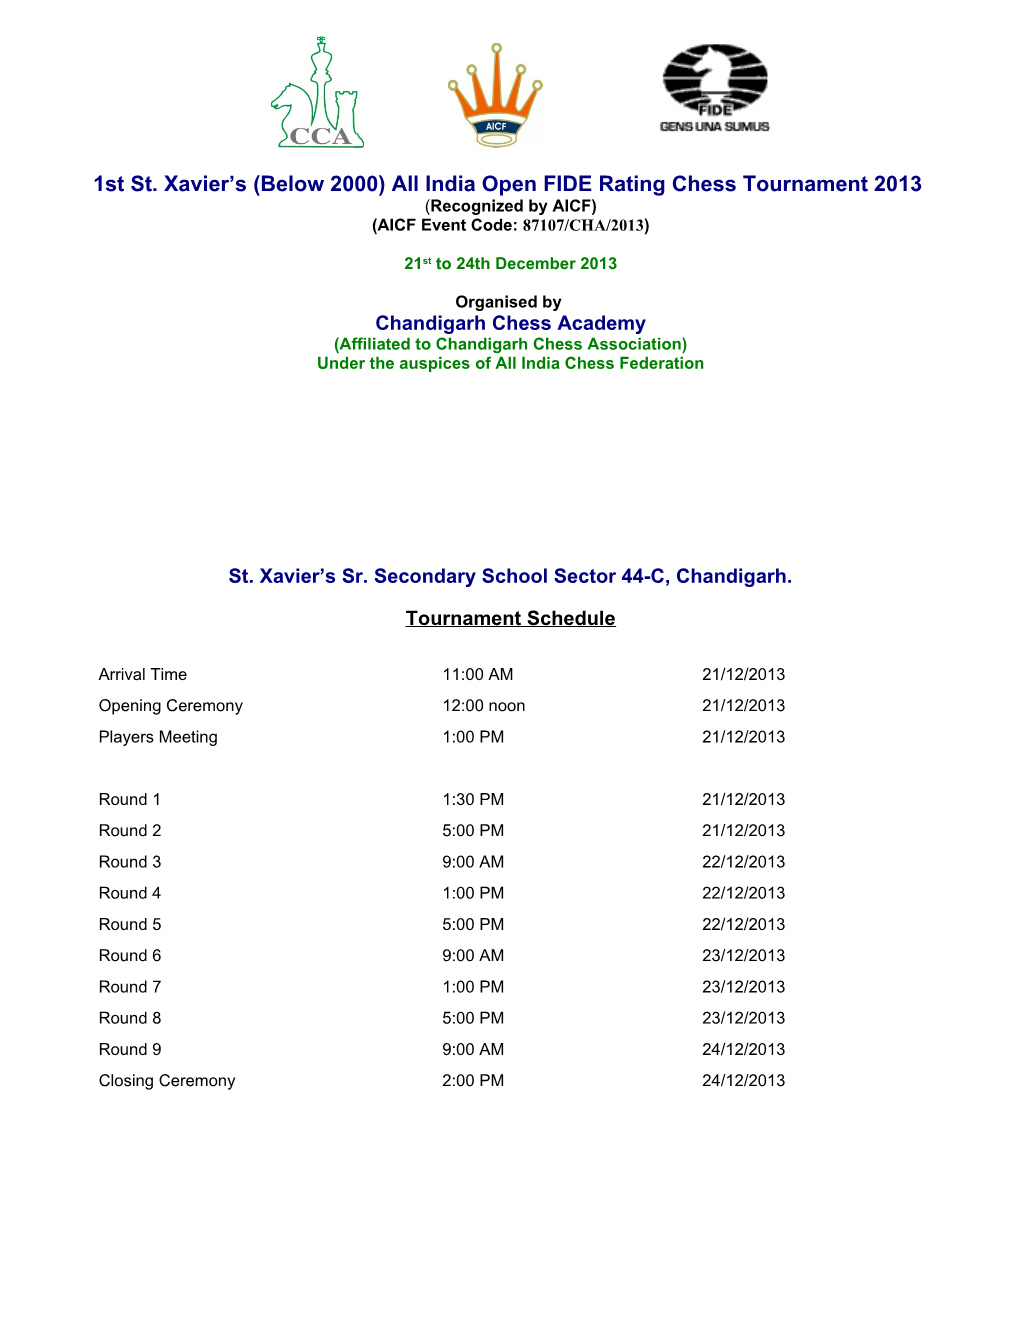 1St Chandigarh Open Fide Rating Chess Championship 2010, from 1St to 6Th Jan , 2010